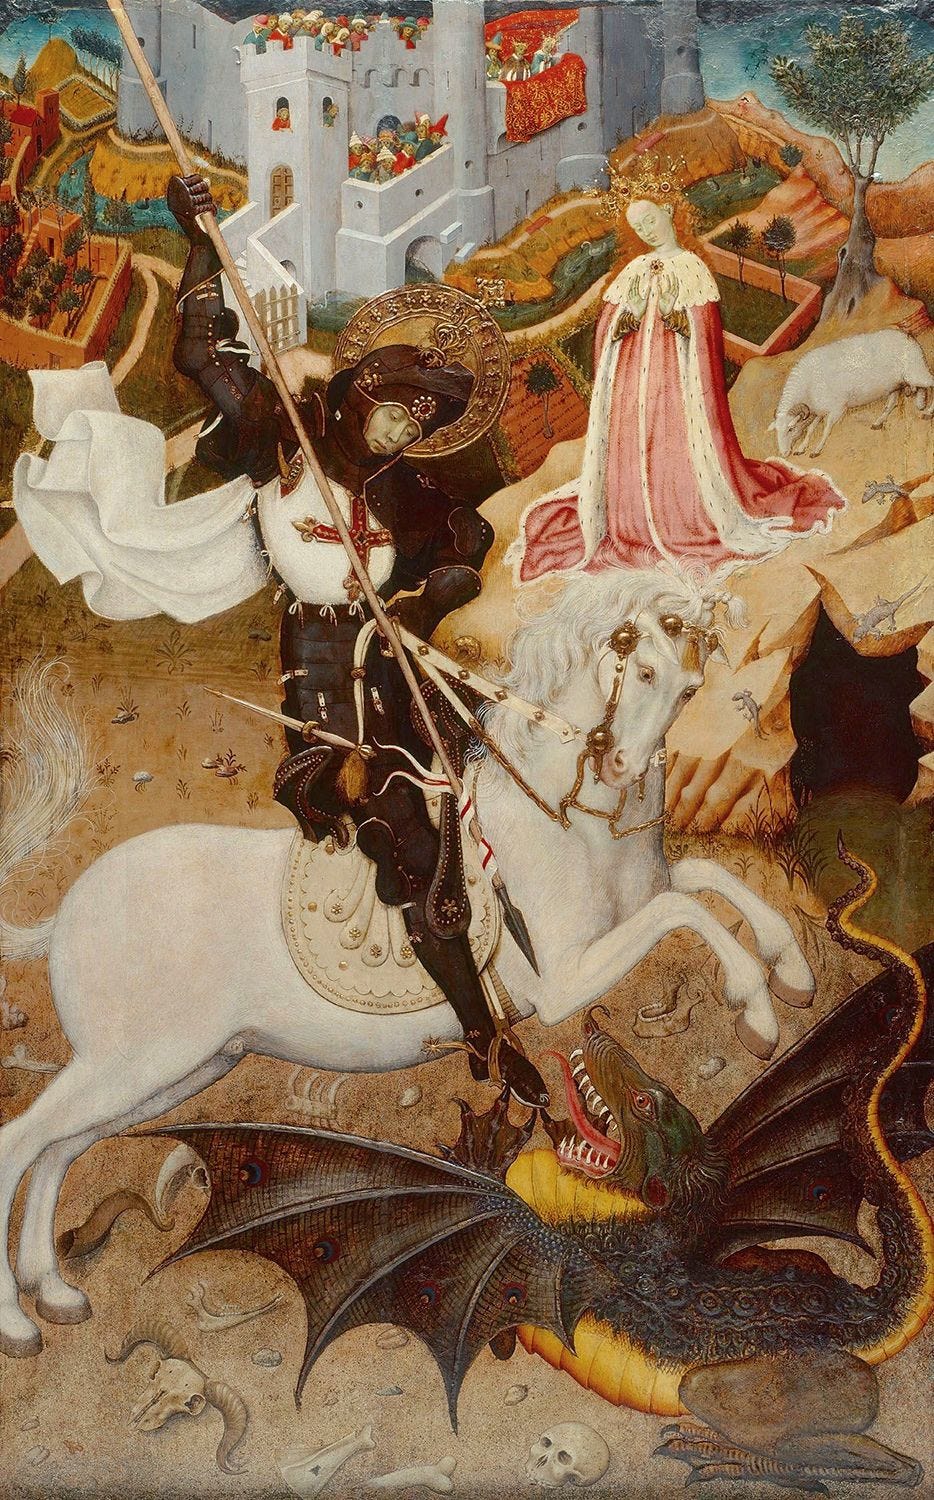 St George on a white horse, spearing a dark-coloured dragon with a yellow breast. Behind him stands a princess in a pink gown with a red and white cloak